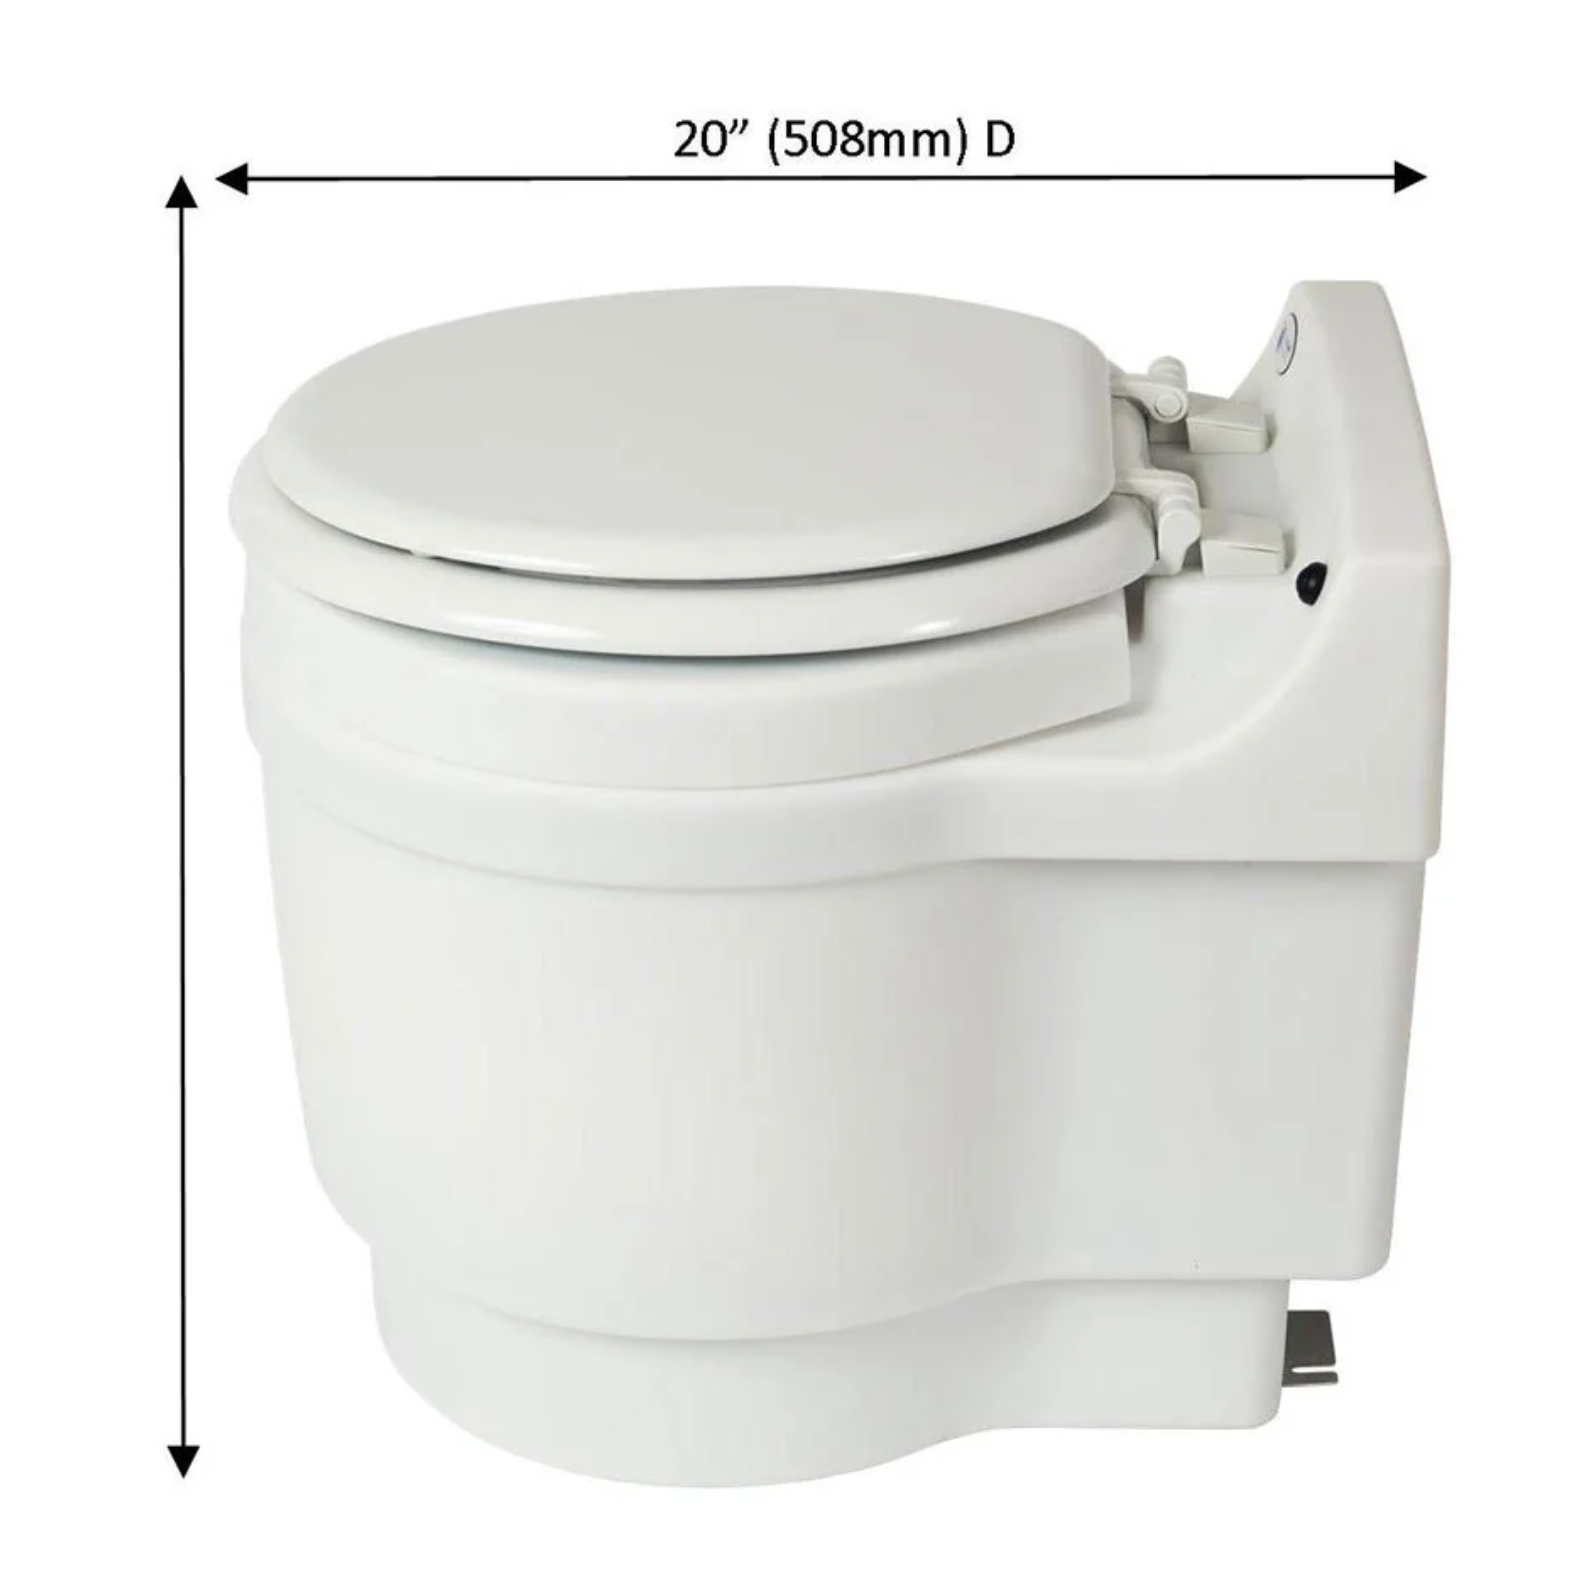 Laveo Dry Flush Portable Electric Waterless Toilet with Wall Outlet 110V DF1045AC